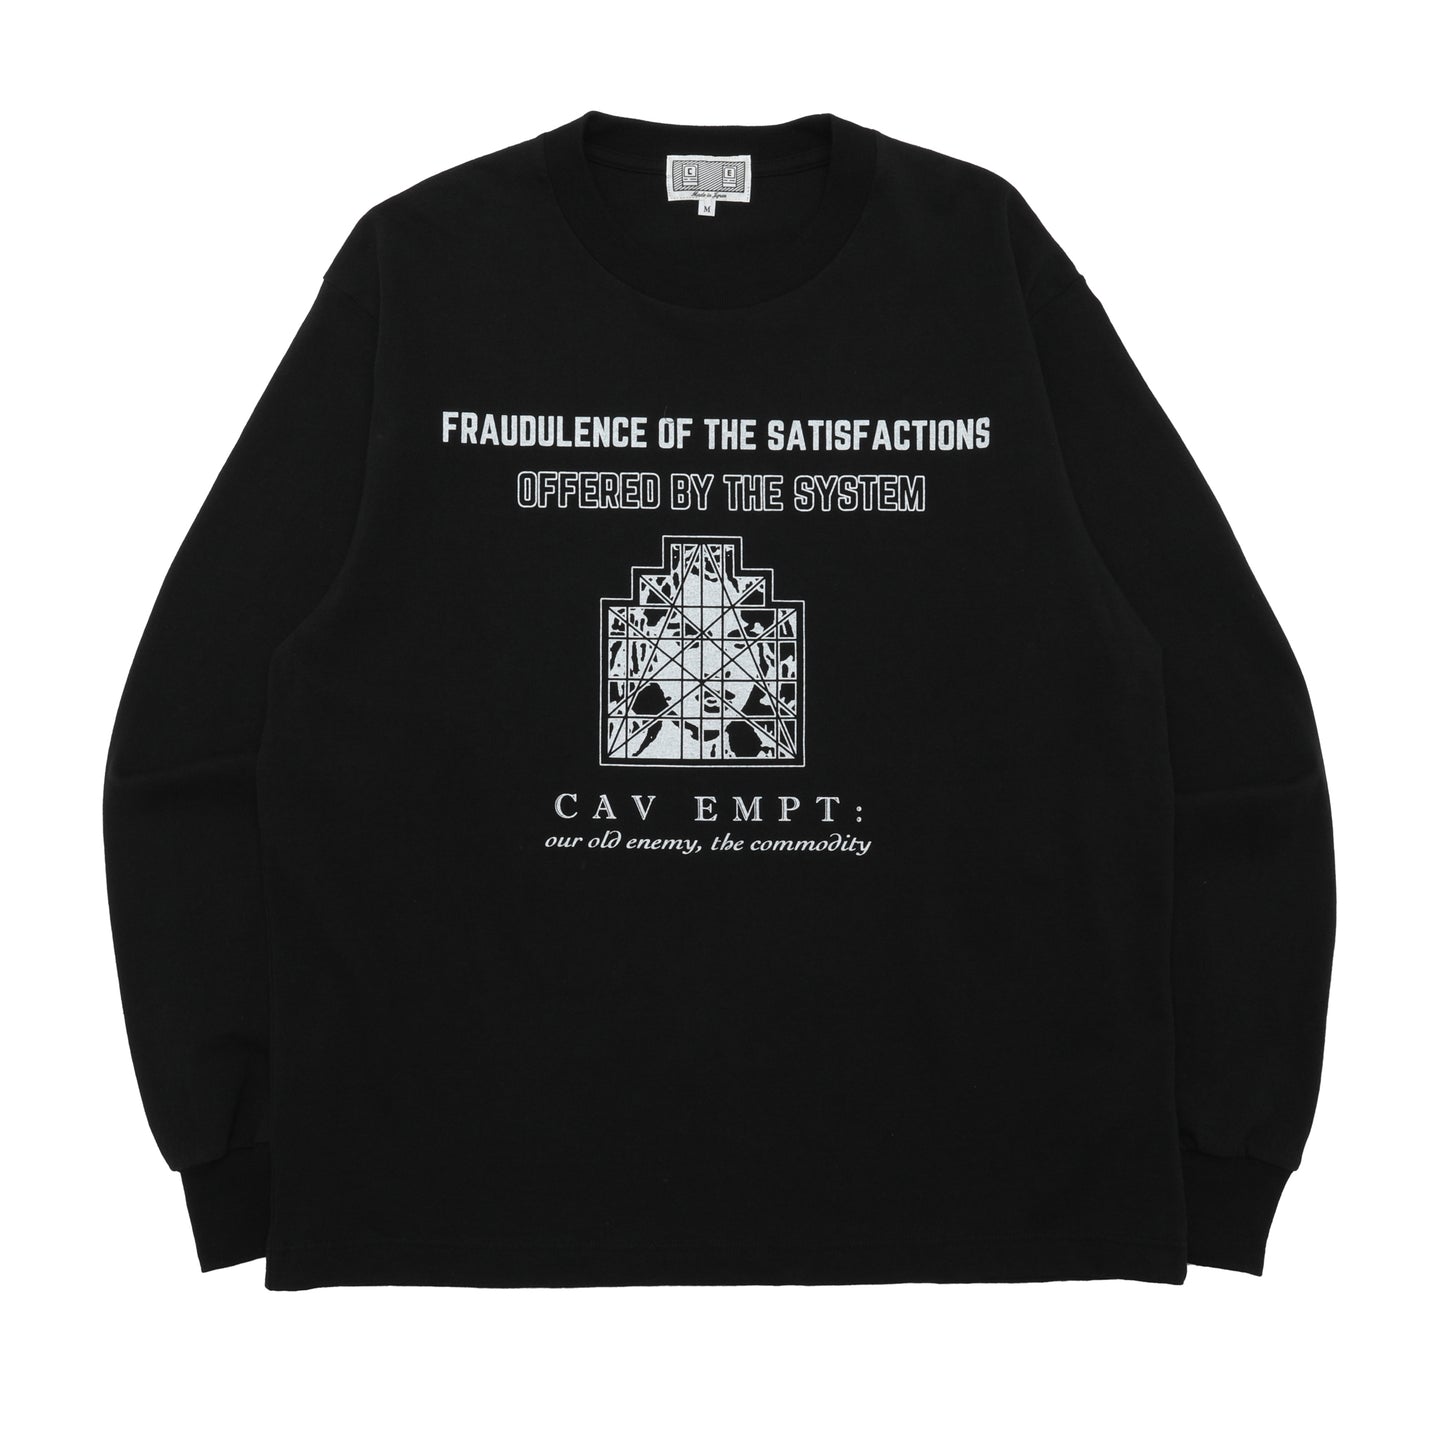 Cav Empt Offered By The System L/S T-Shirt Black